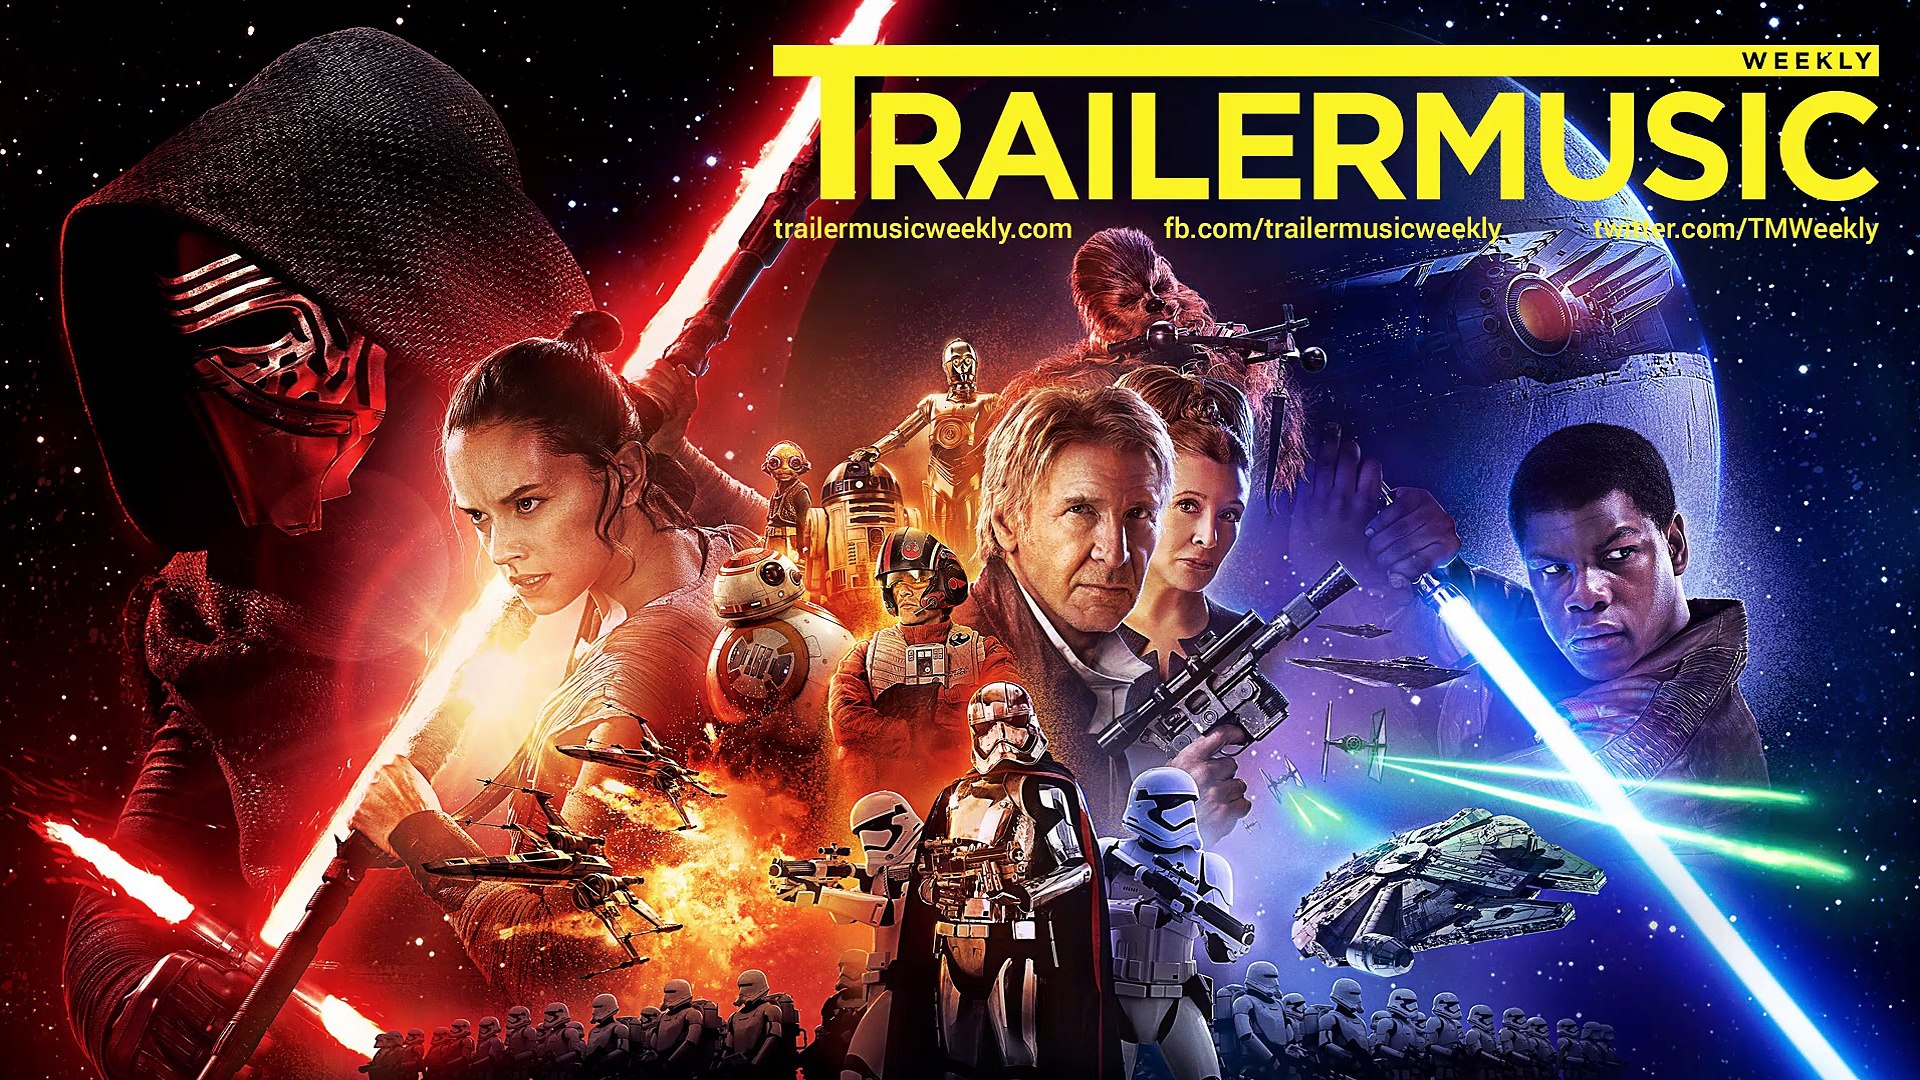 Star Wars: The Force Awakens - Trailer Music - video Dailymotion